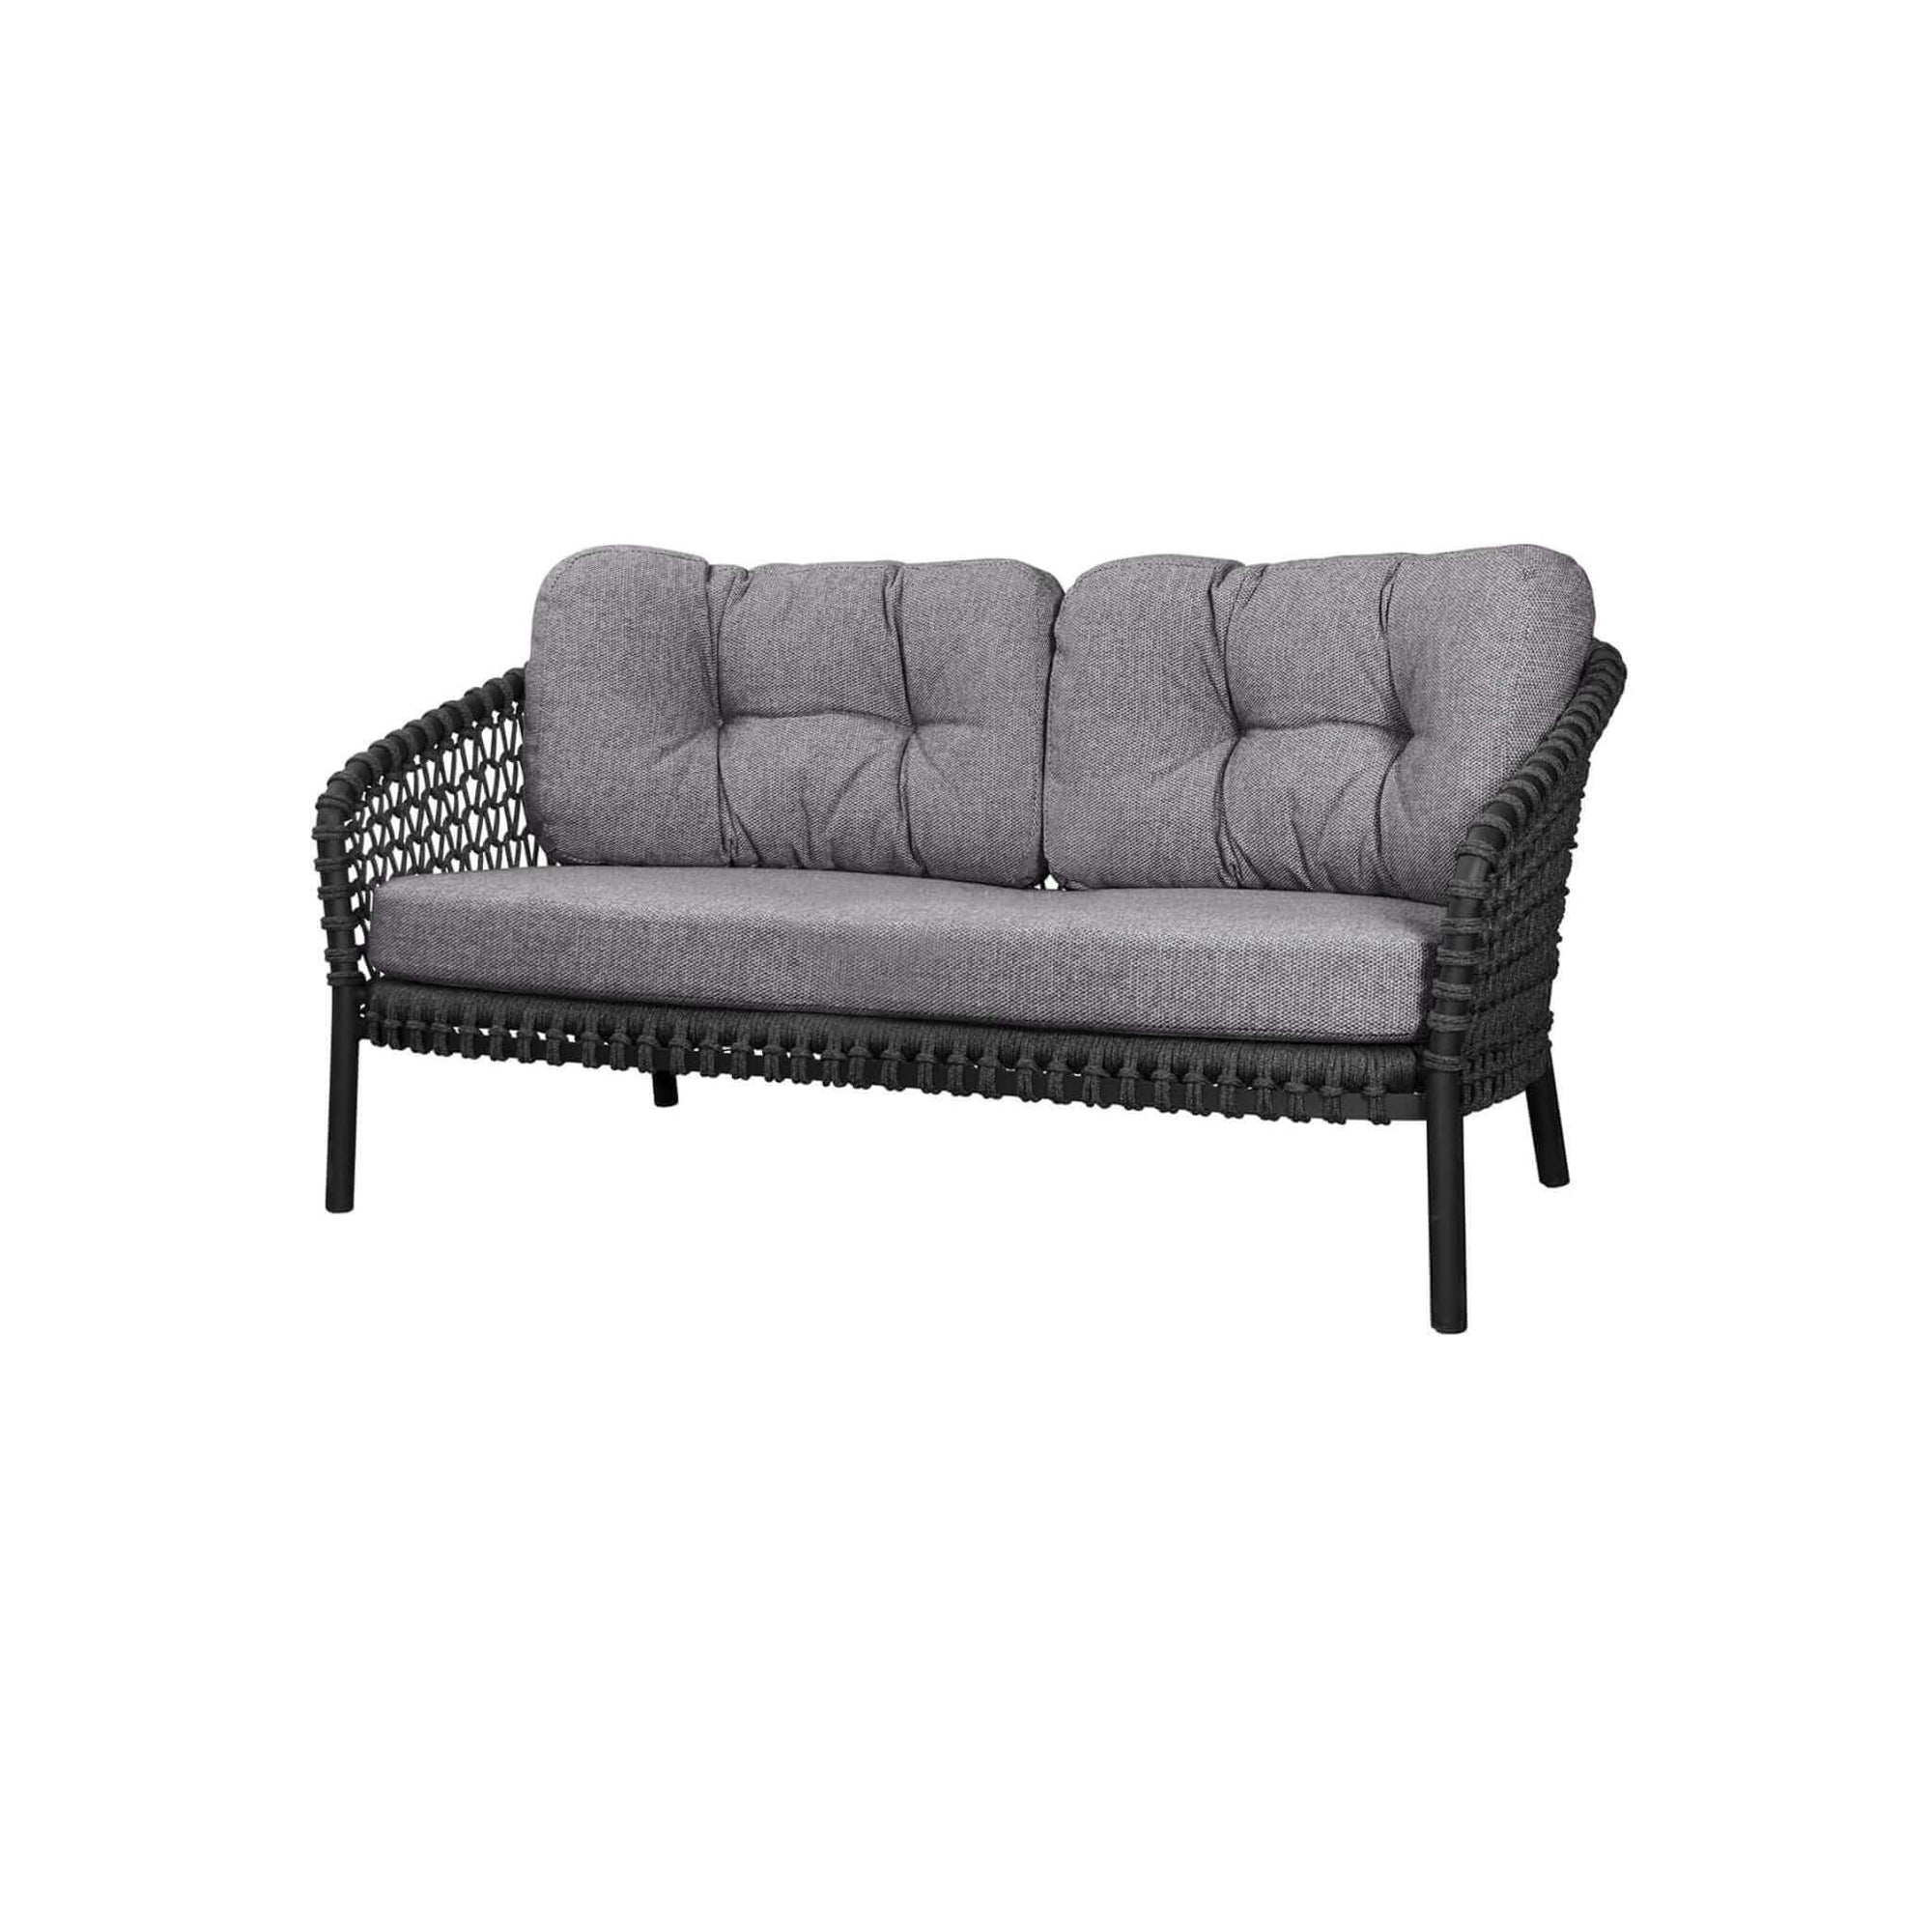 Cane-Line Ocean Large 2-Seater Sofa-Natural, Cane-line Flat Weave